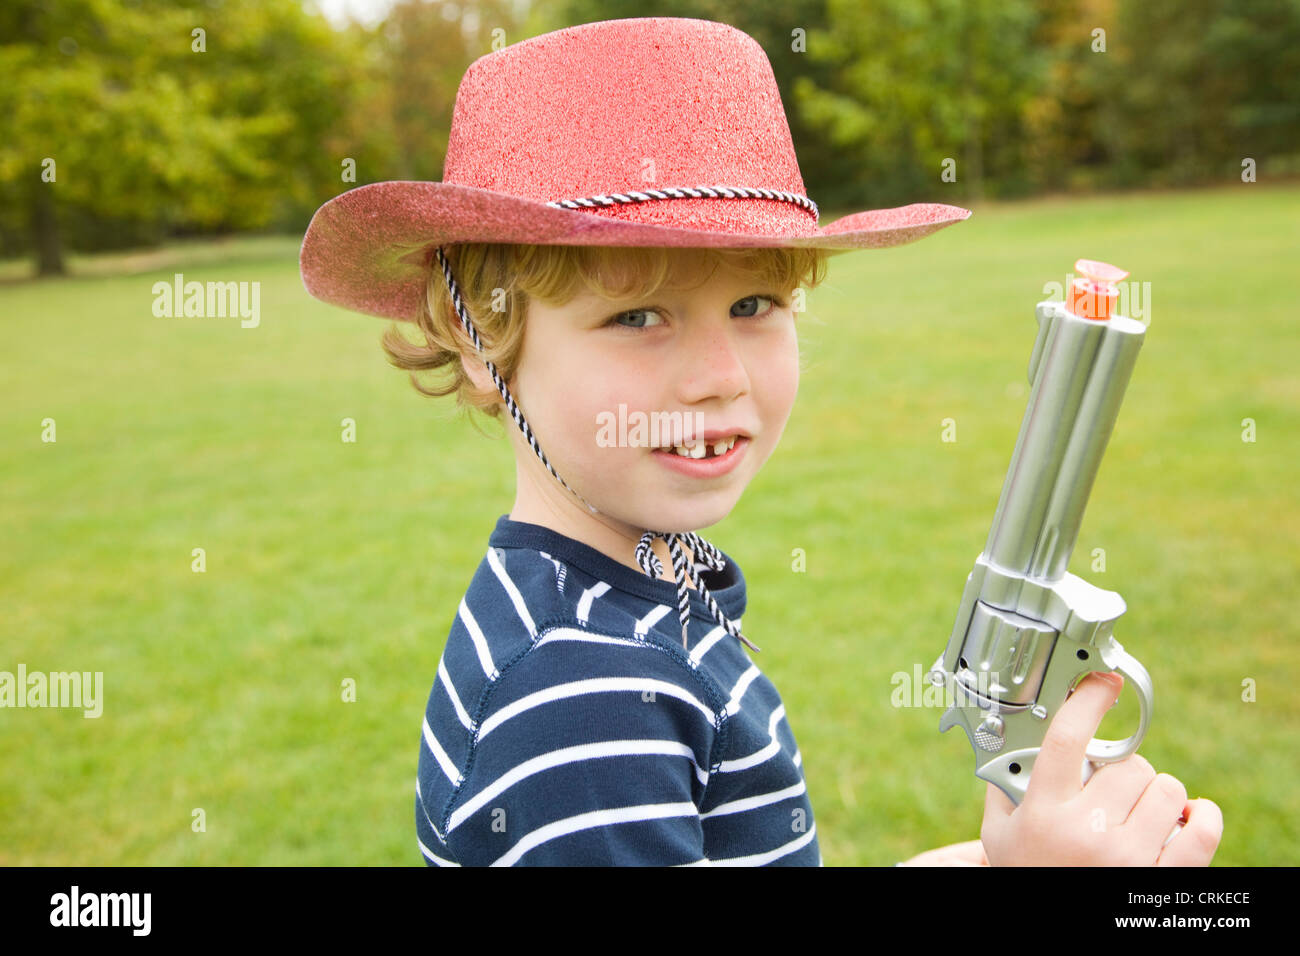 Boy playing with toy gun outdoors Stock Photo